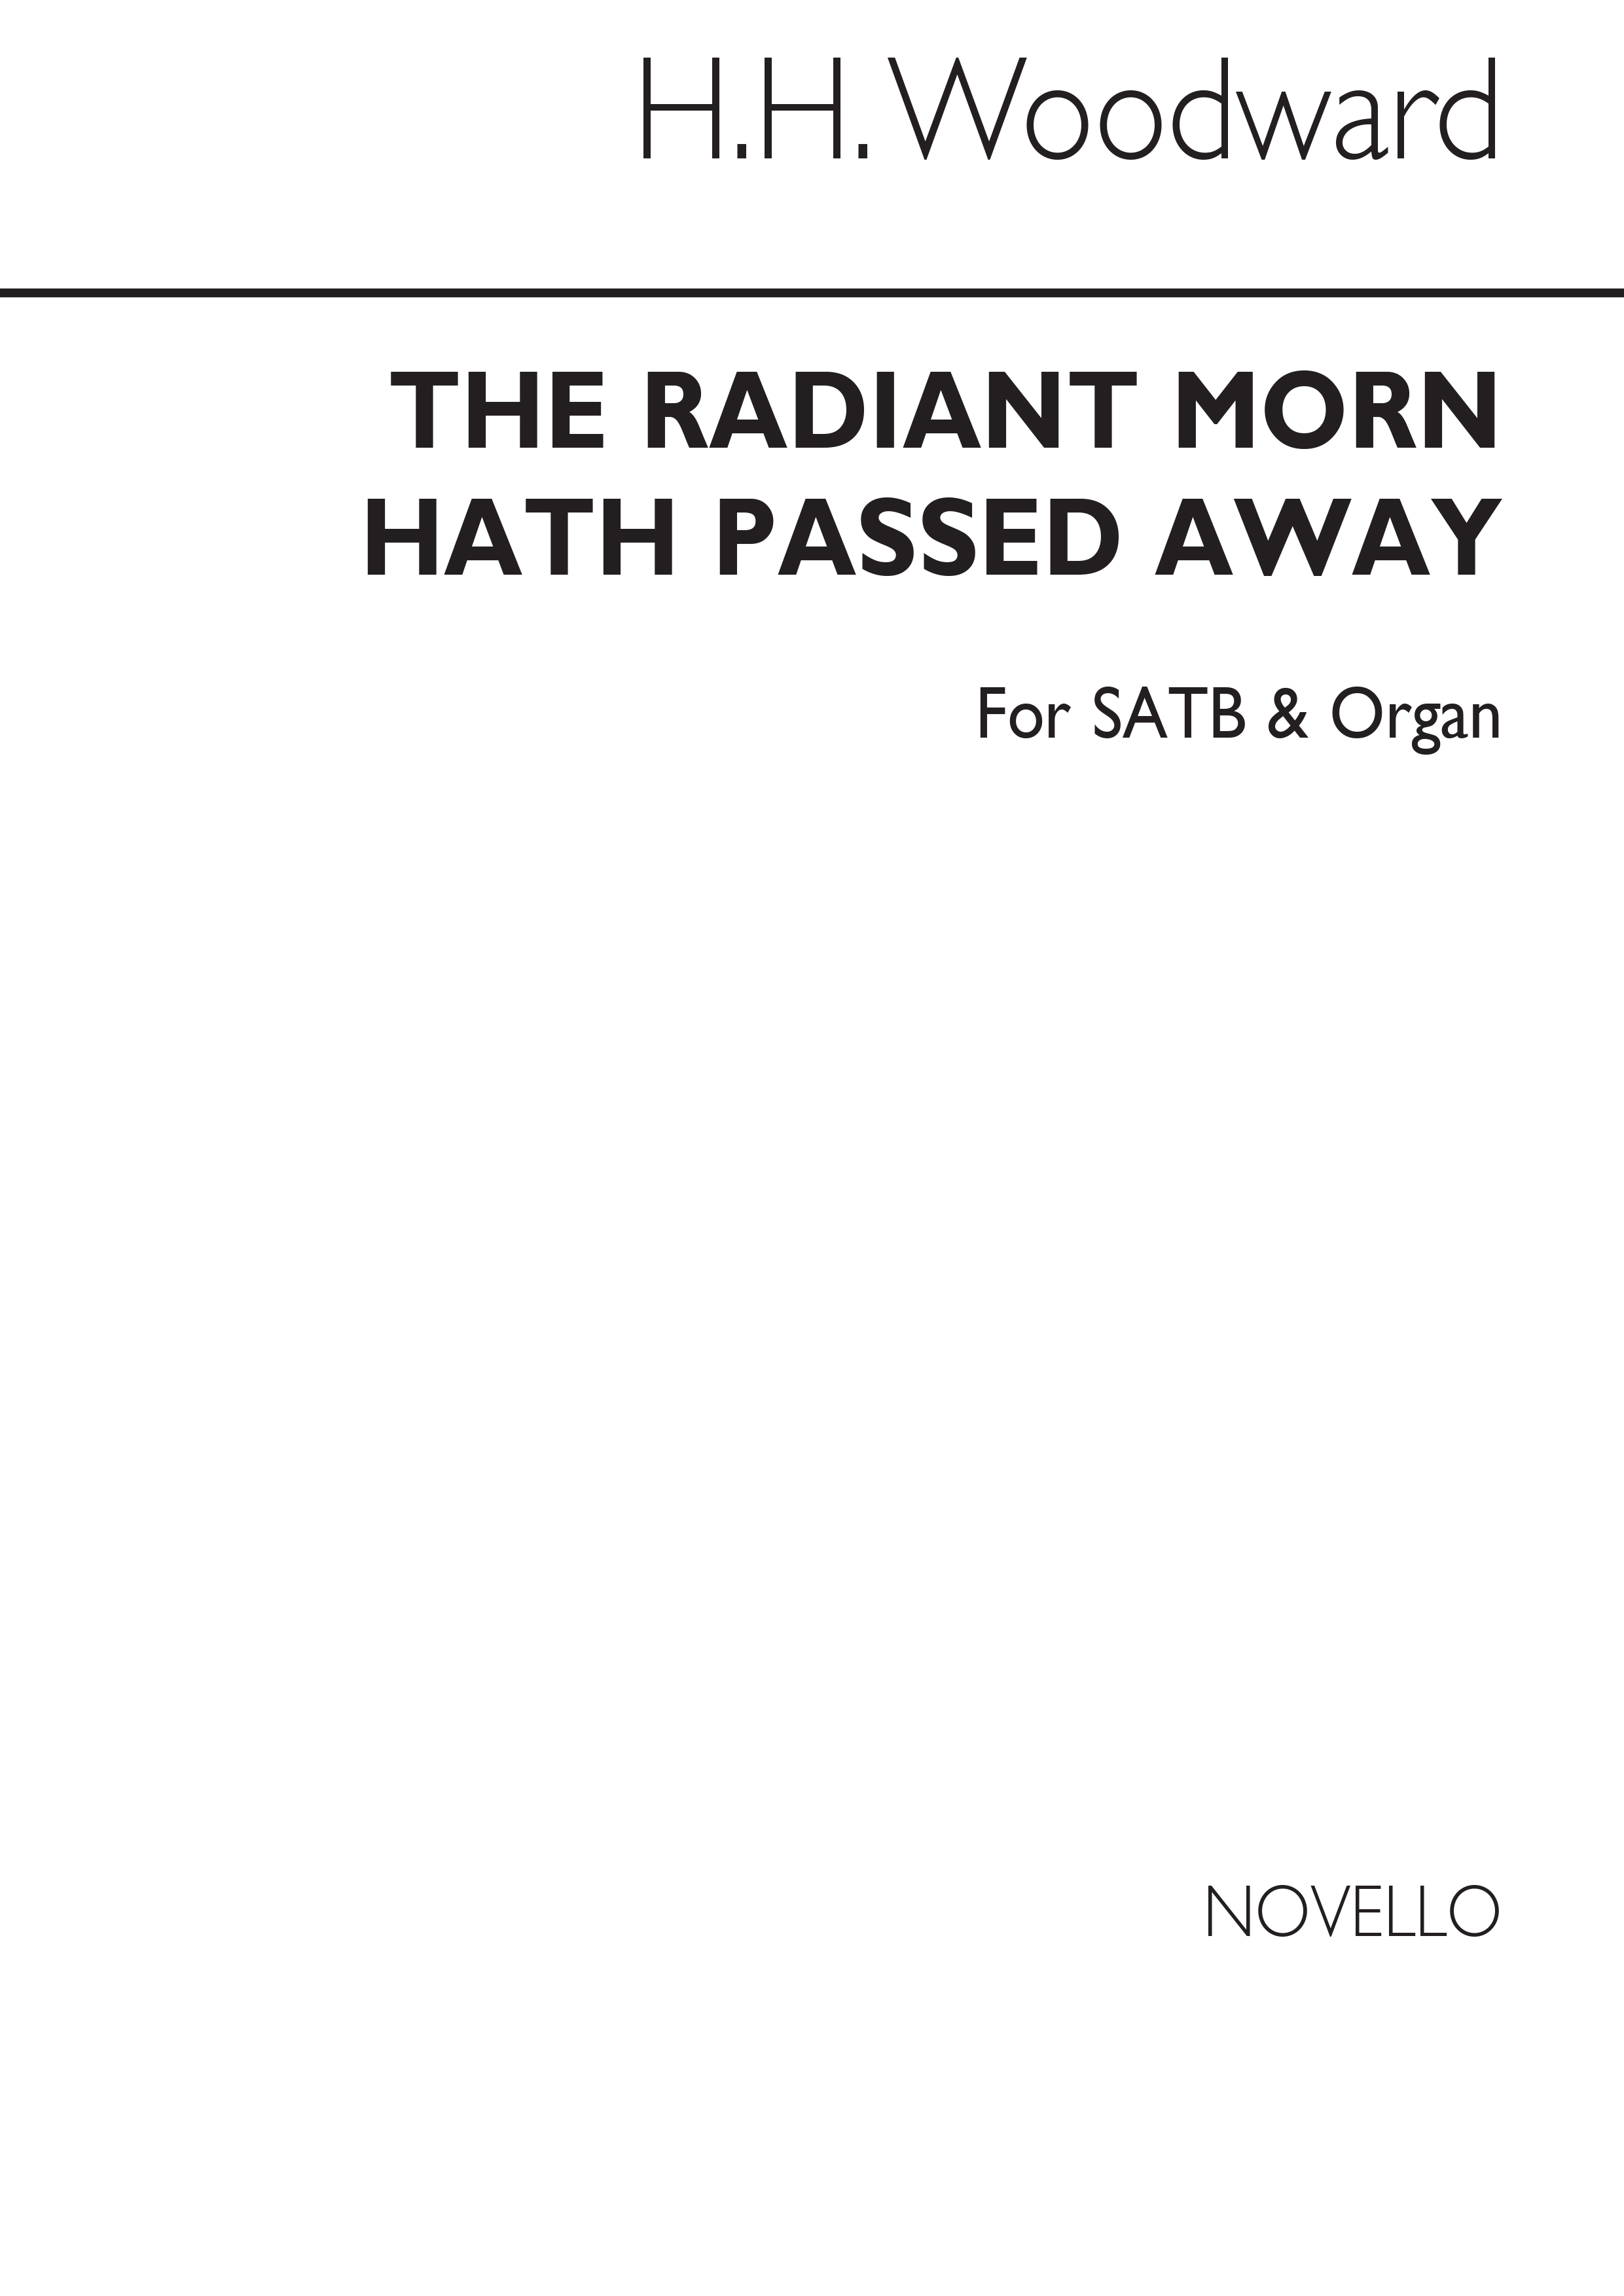 Rev H. H. Woodward: The Radiant Morn Hath Passed Away